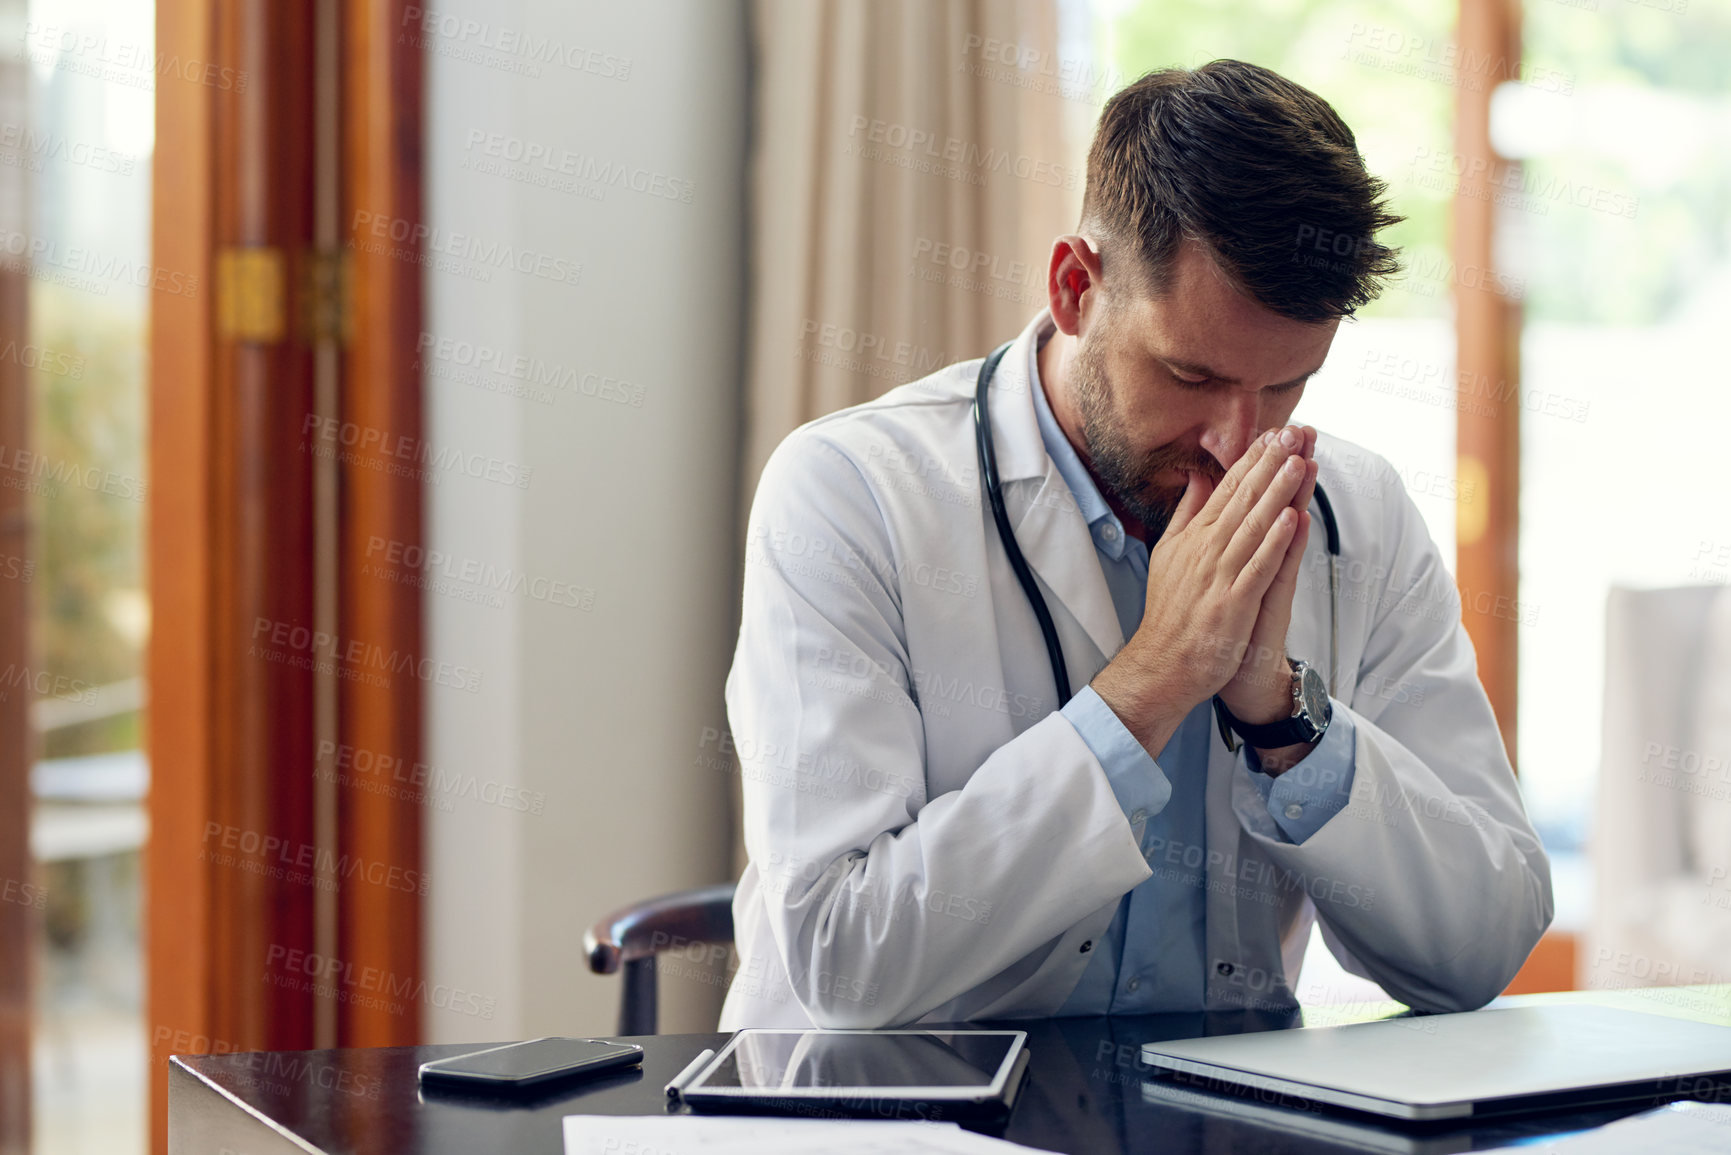 Buy stock photo Cropped shot of a handsome male doctor praying while sitting in his office